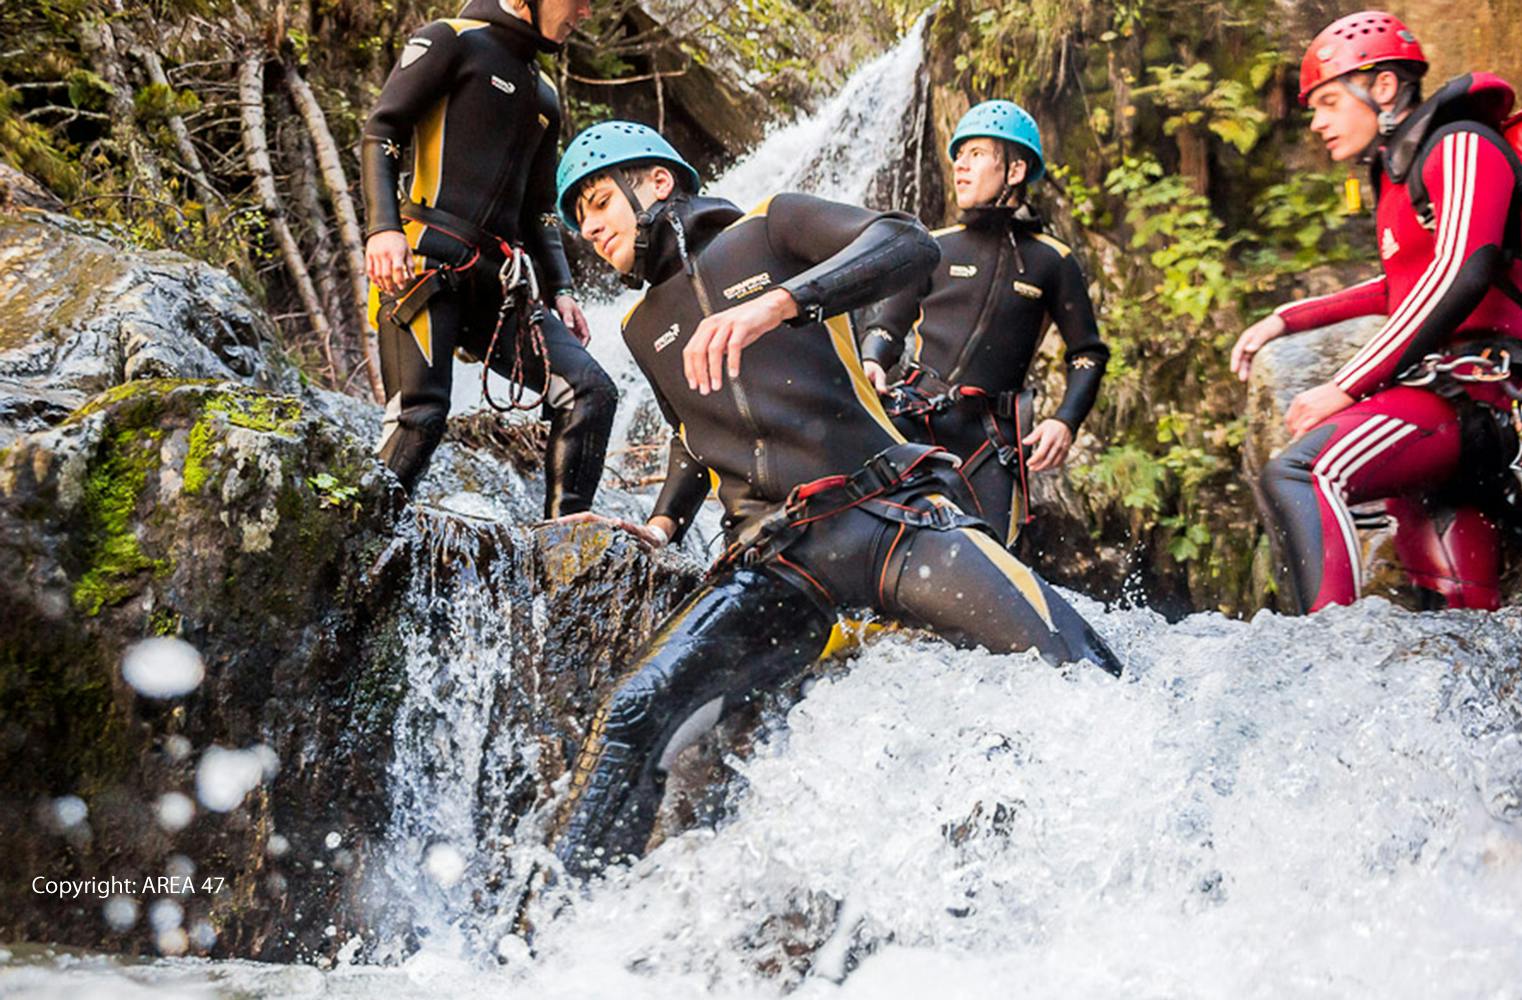 Action Trip | Rafting Imster Schlucht, Canyoning, Blobbing